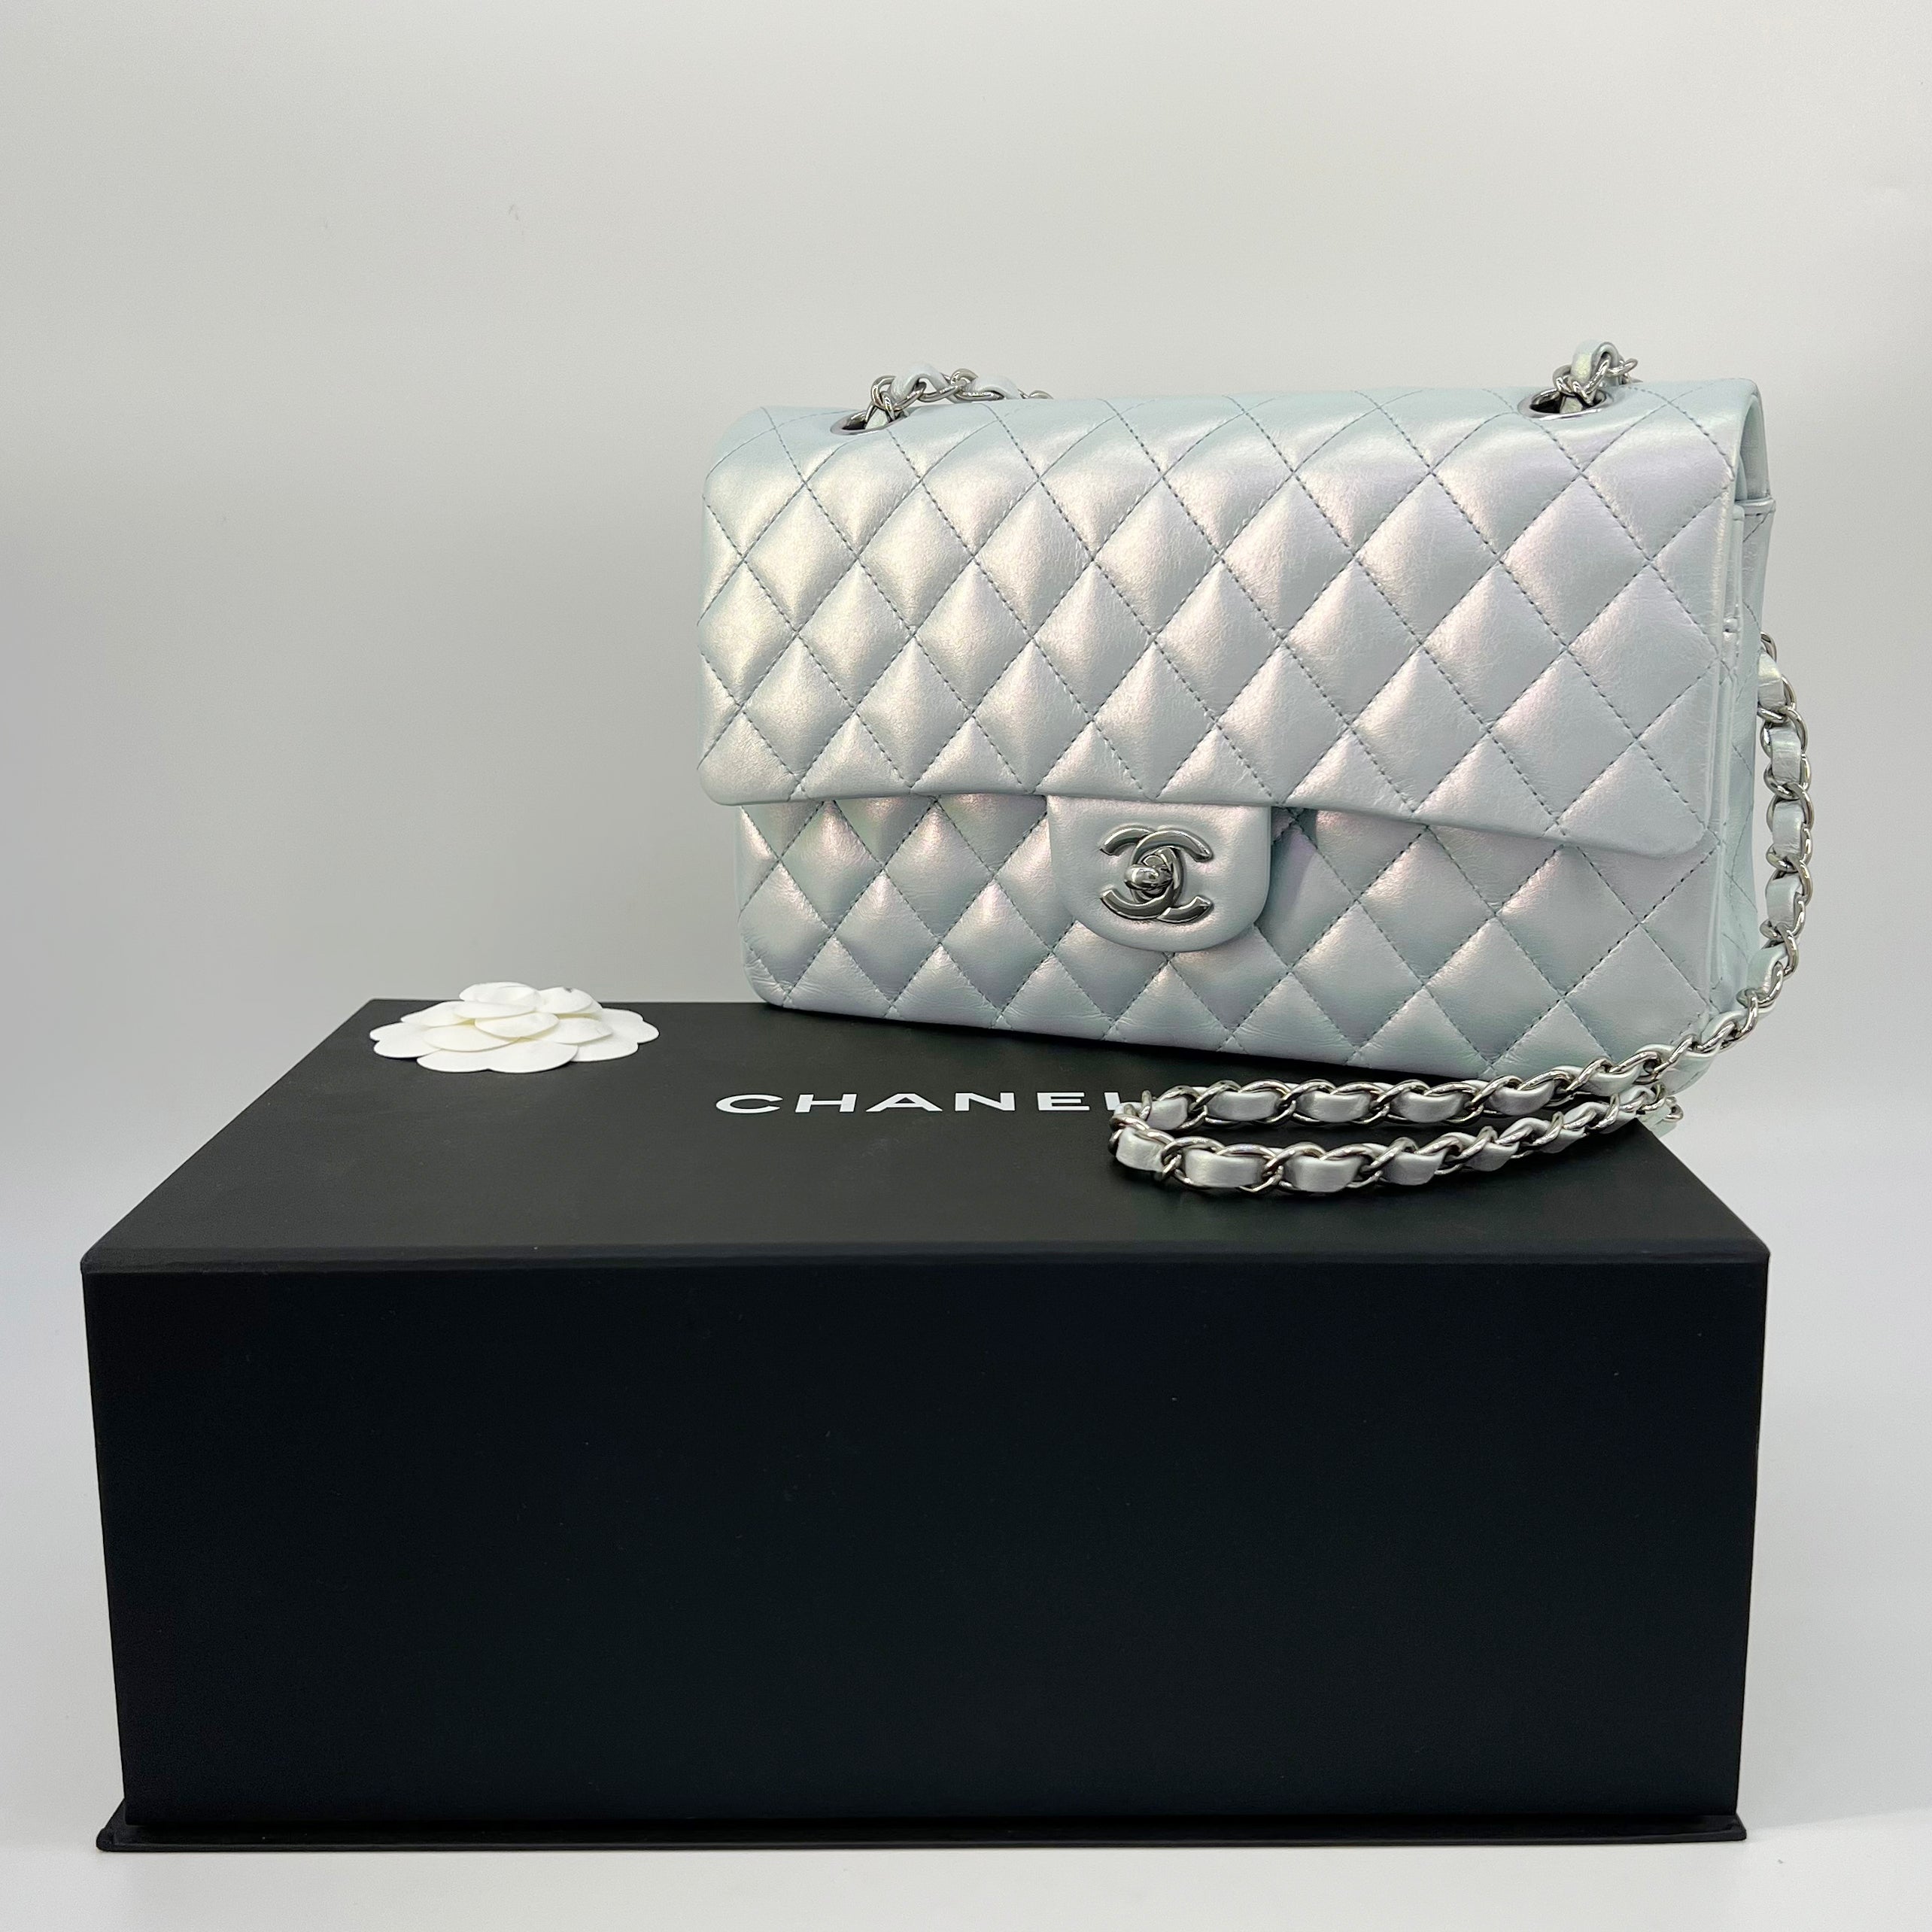 Guaranteed Authentic Chanel Double Flap Classic Timeless 10 light Blue  Iridescent Lambskin Shoulder Bag